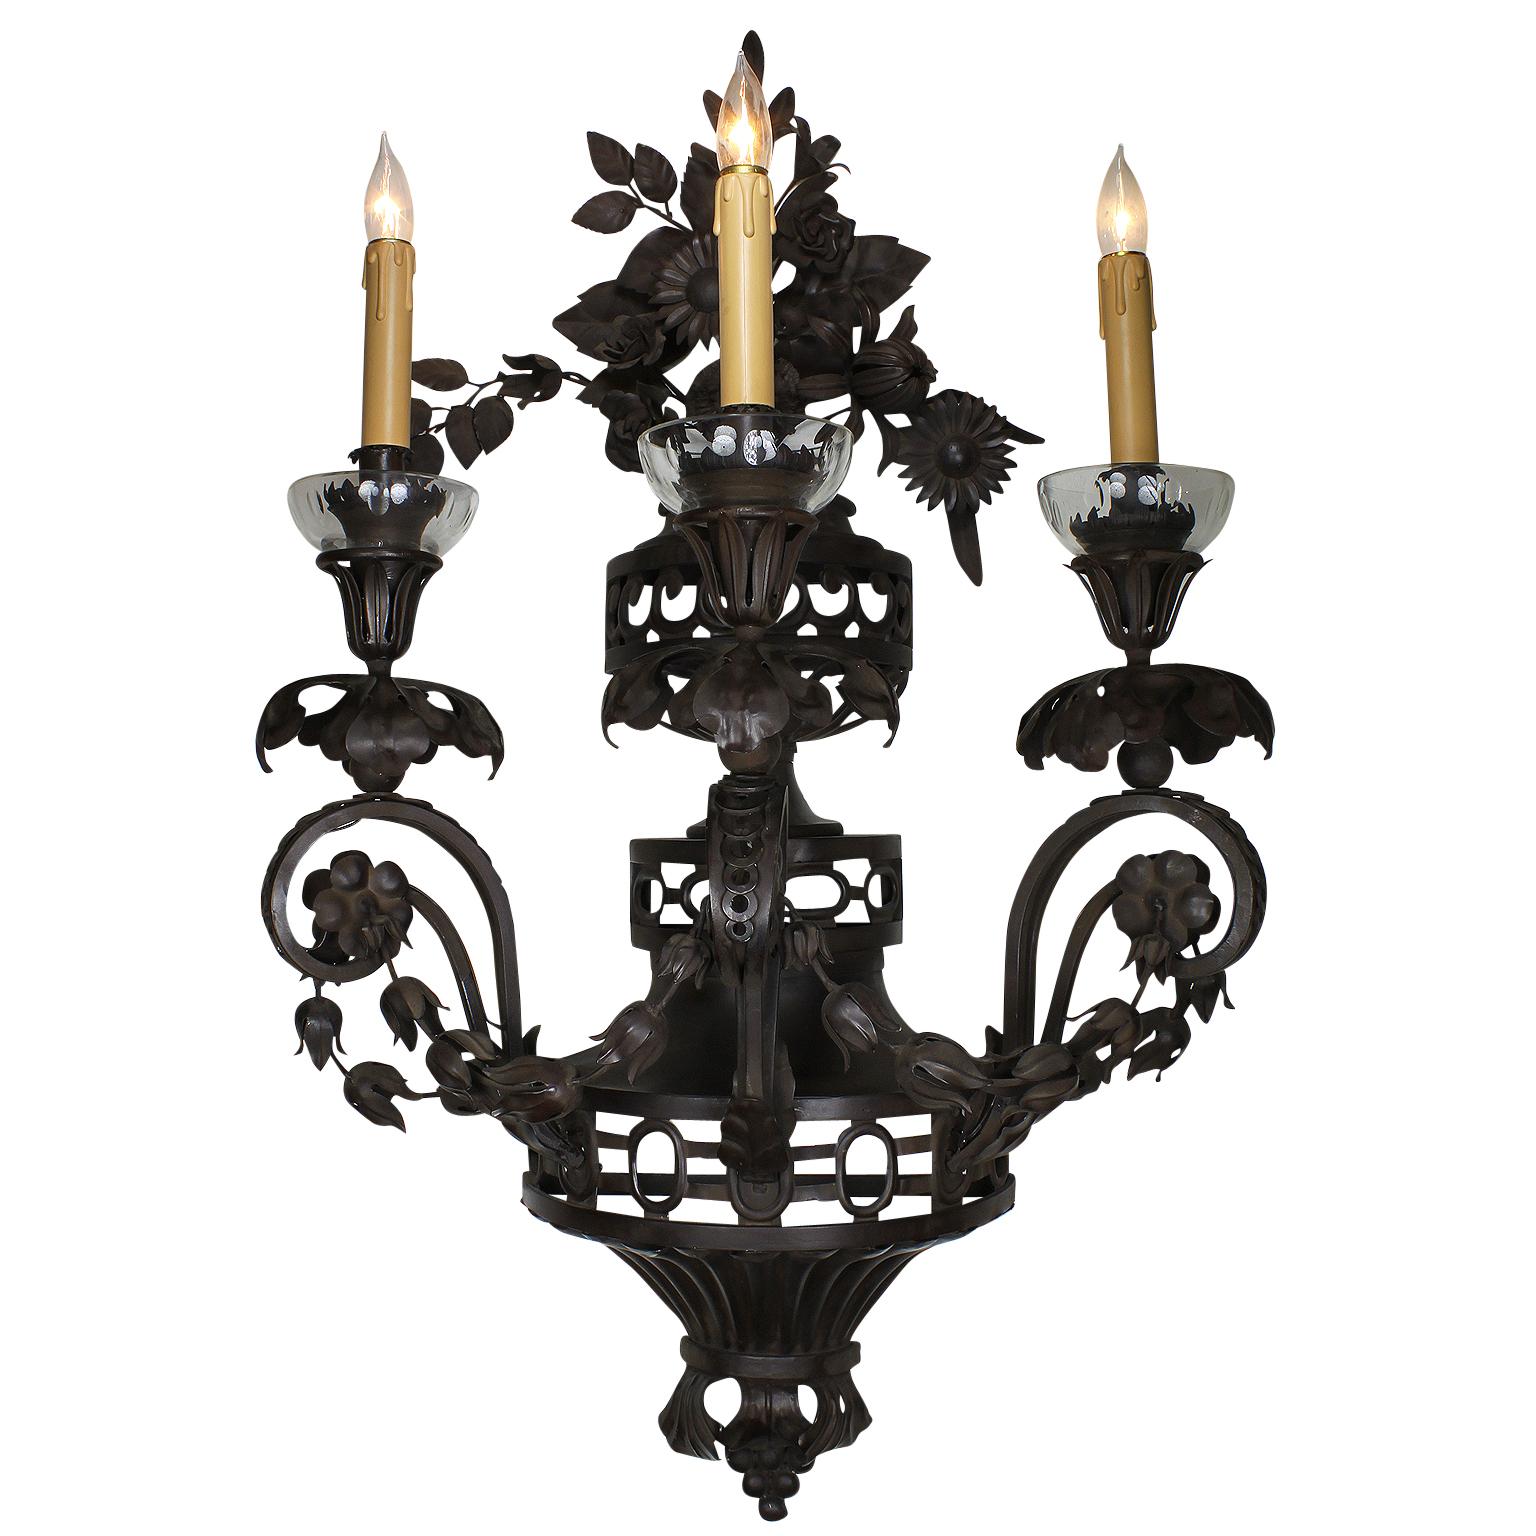 A large and rare pair of French 20th century Rococo Revival style patinated metal three light wall sconces. The urn shaped wall lights in a dark brown patina with three scrolled candle-arms conjoined with flower wreaths and cut-glass wax-holders,